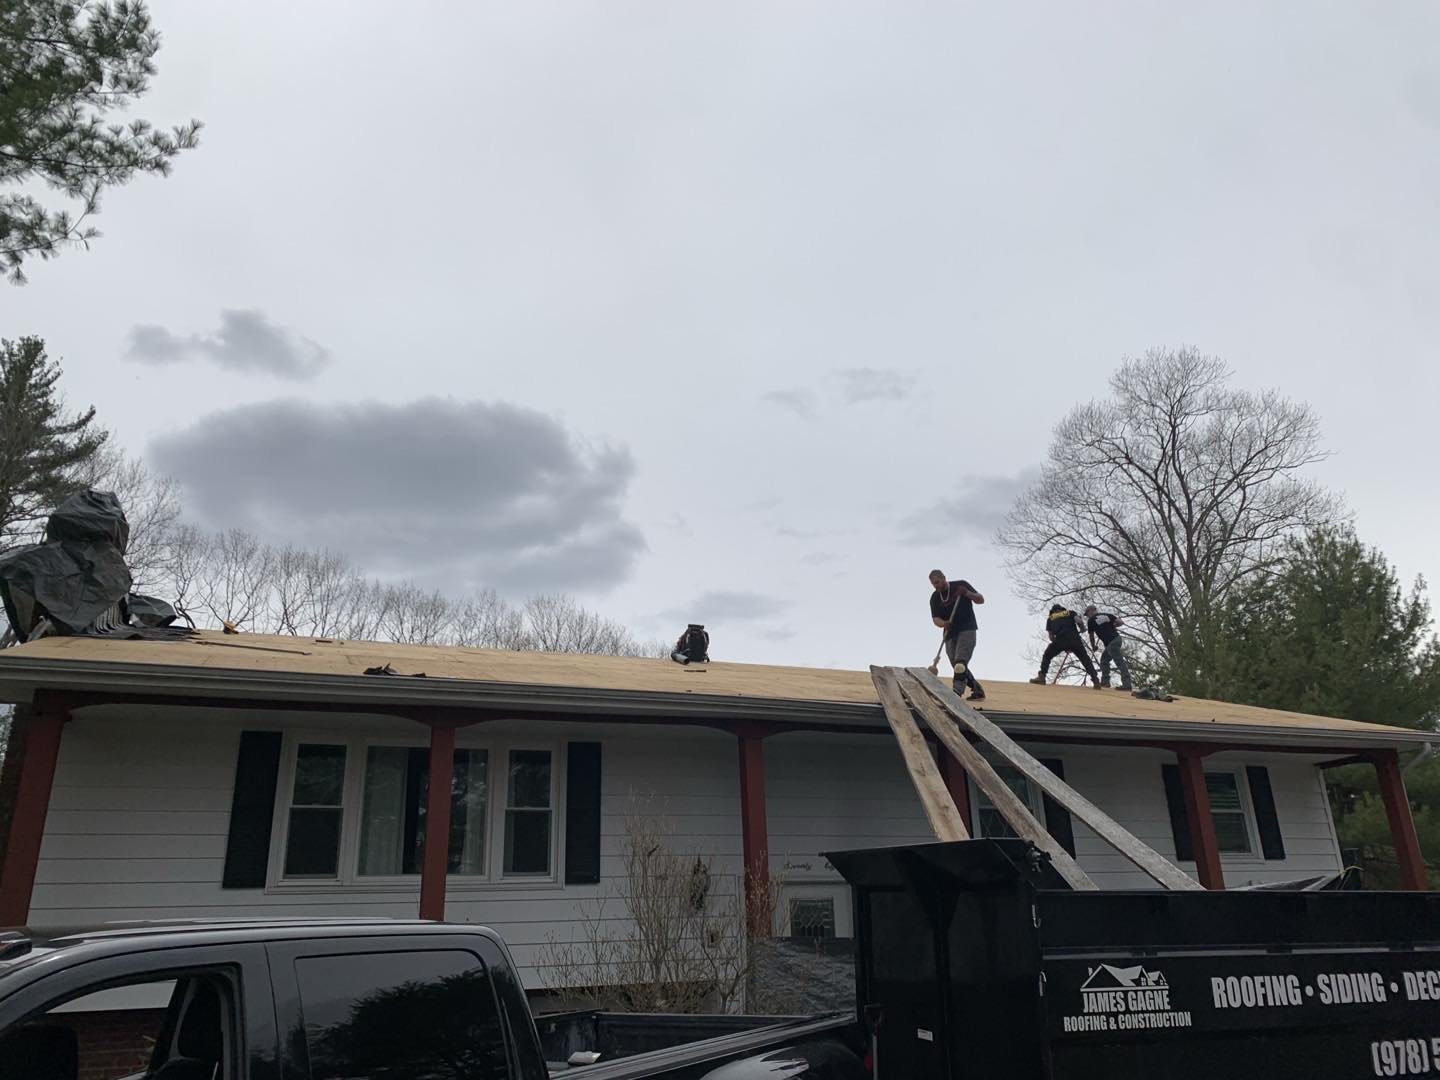 Band of Brothers LLC hard at work today replacing a roof for a customer who is selling his home.